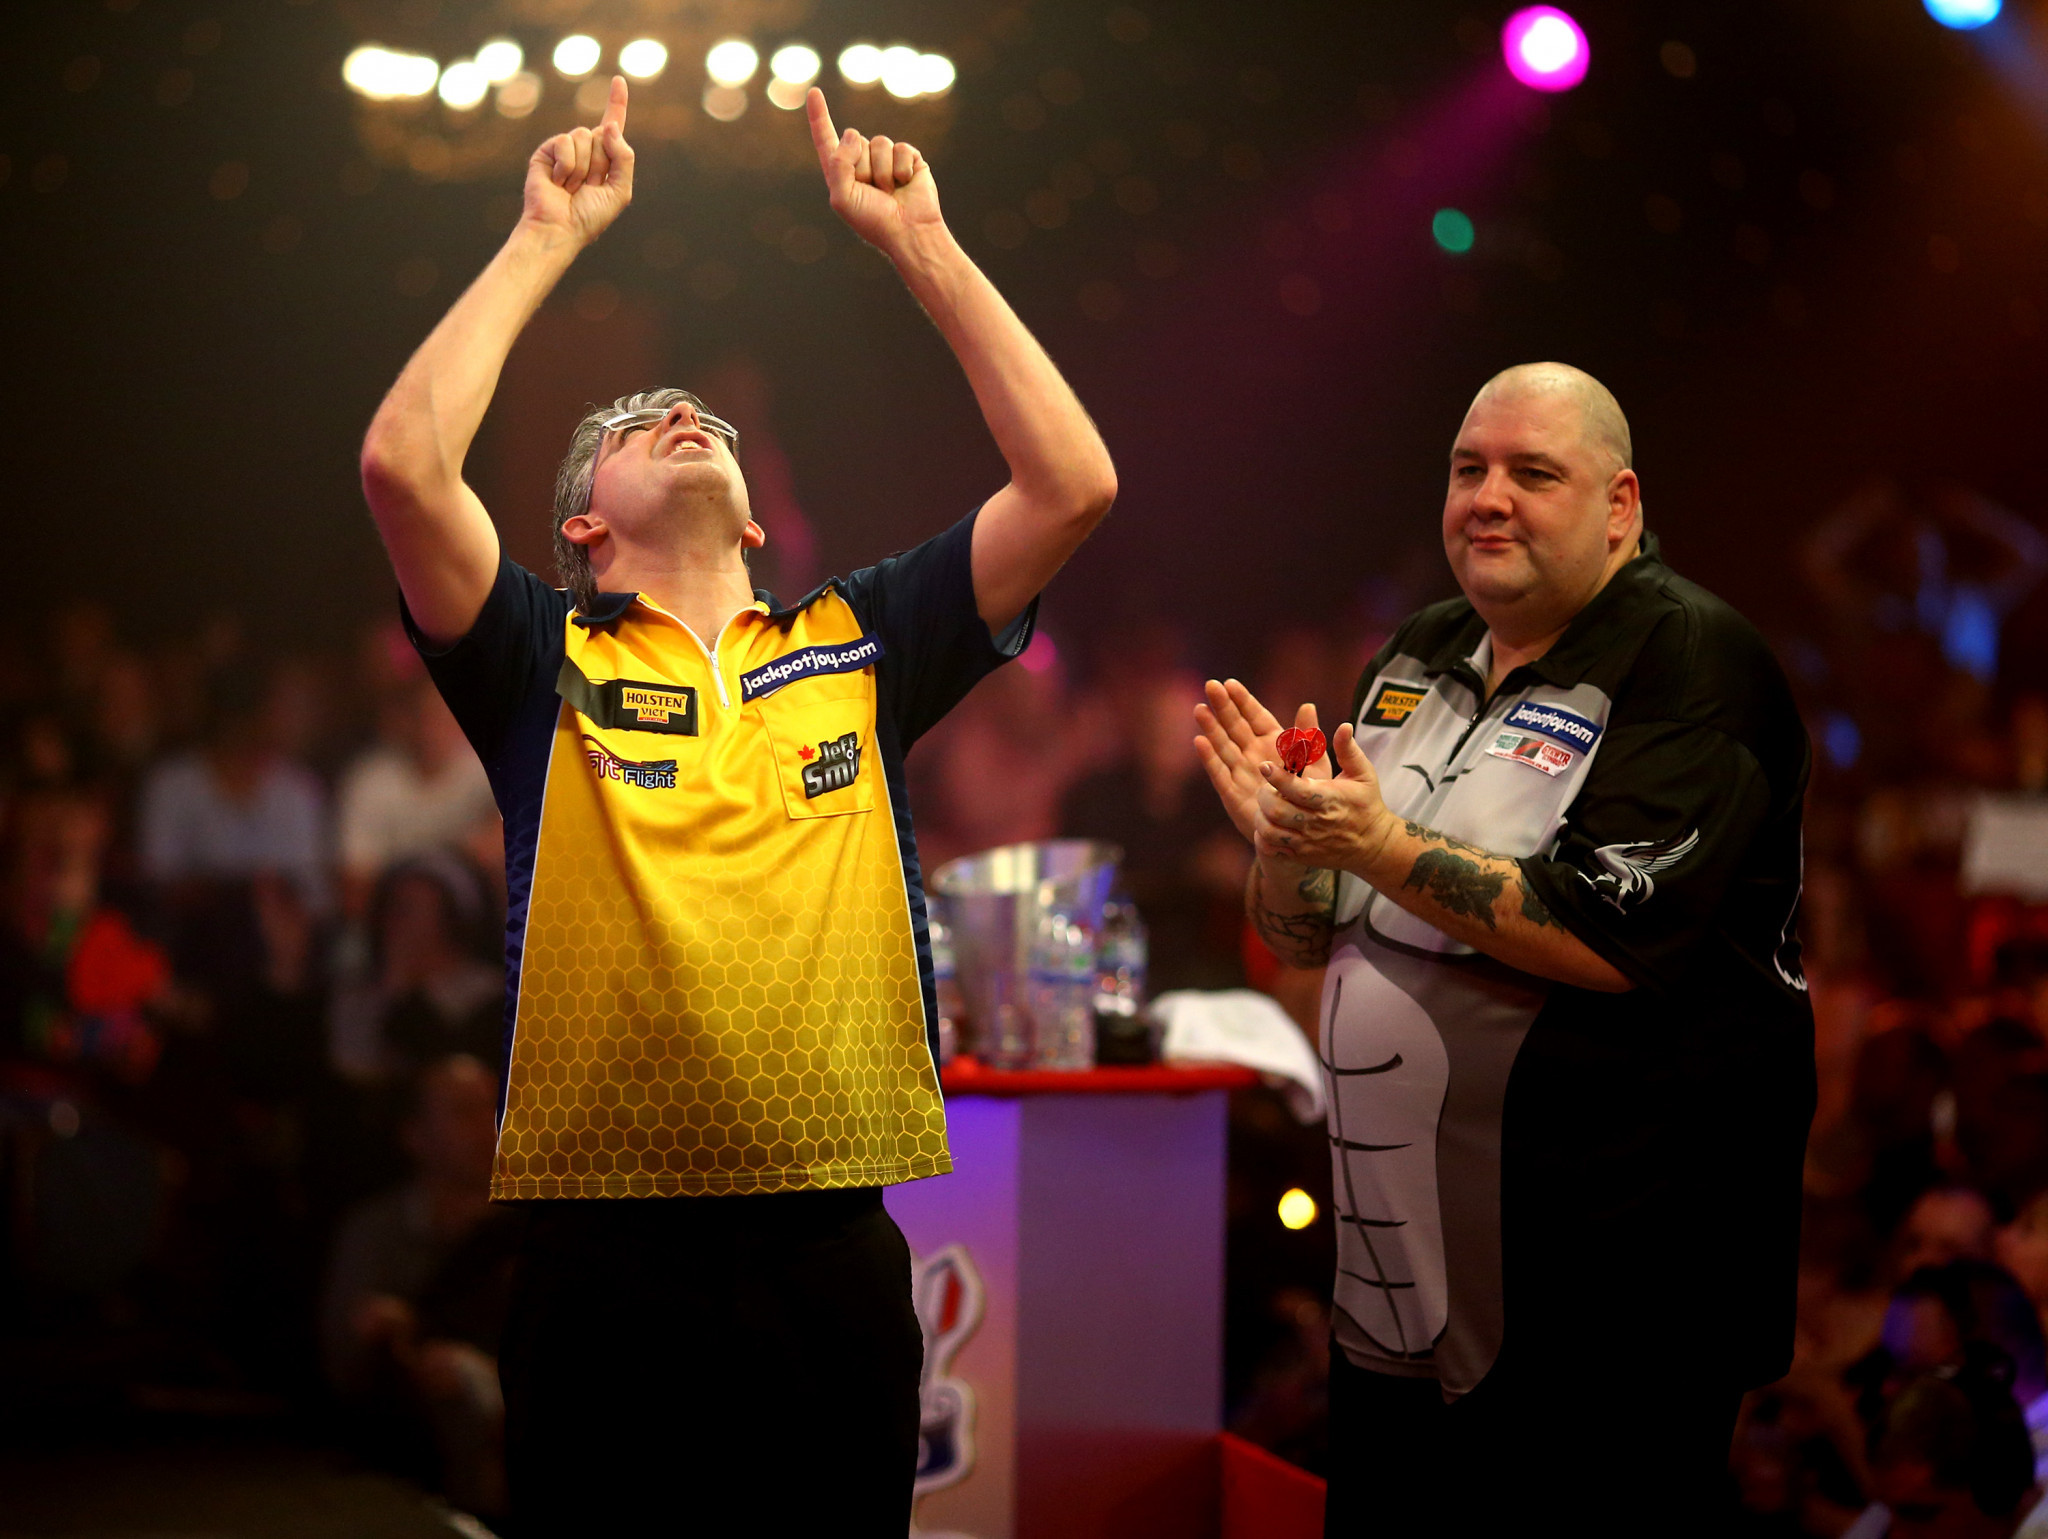 The way it was - Jeff Smith of Canada celebrates winning his quarter final match against Robbie Green of England during the BDO World Championships of 2014 at their old venue of the Lakeside Country Club ©Getty Images

